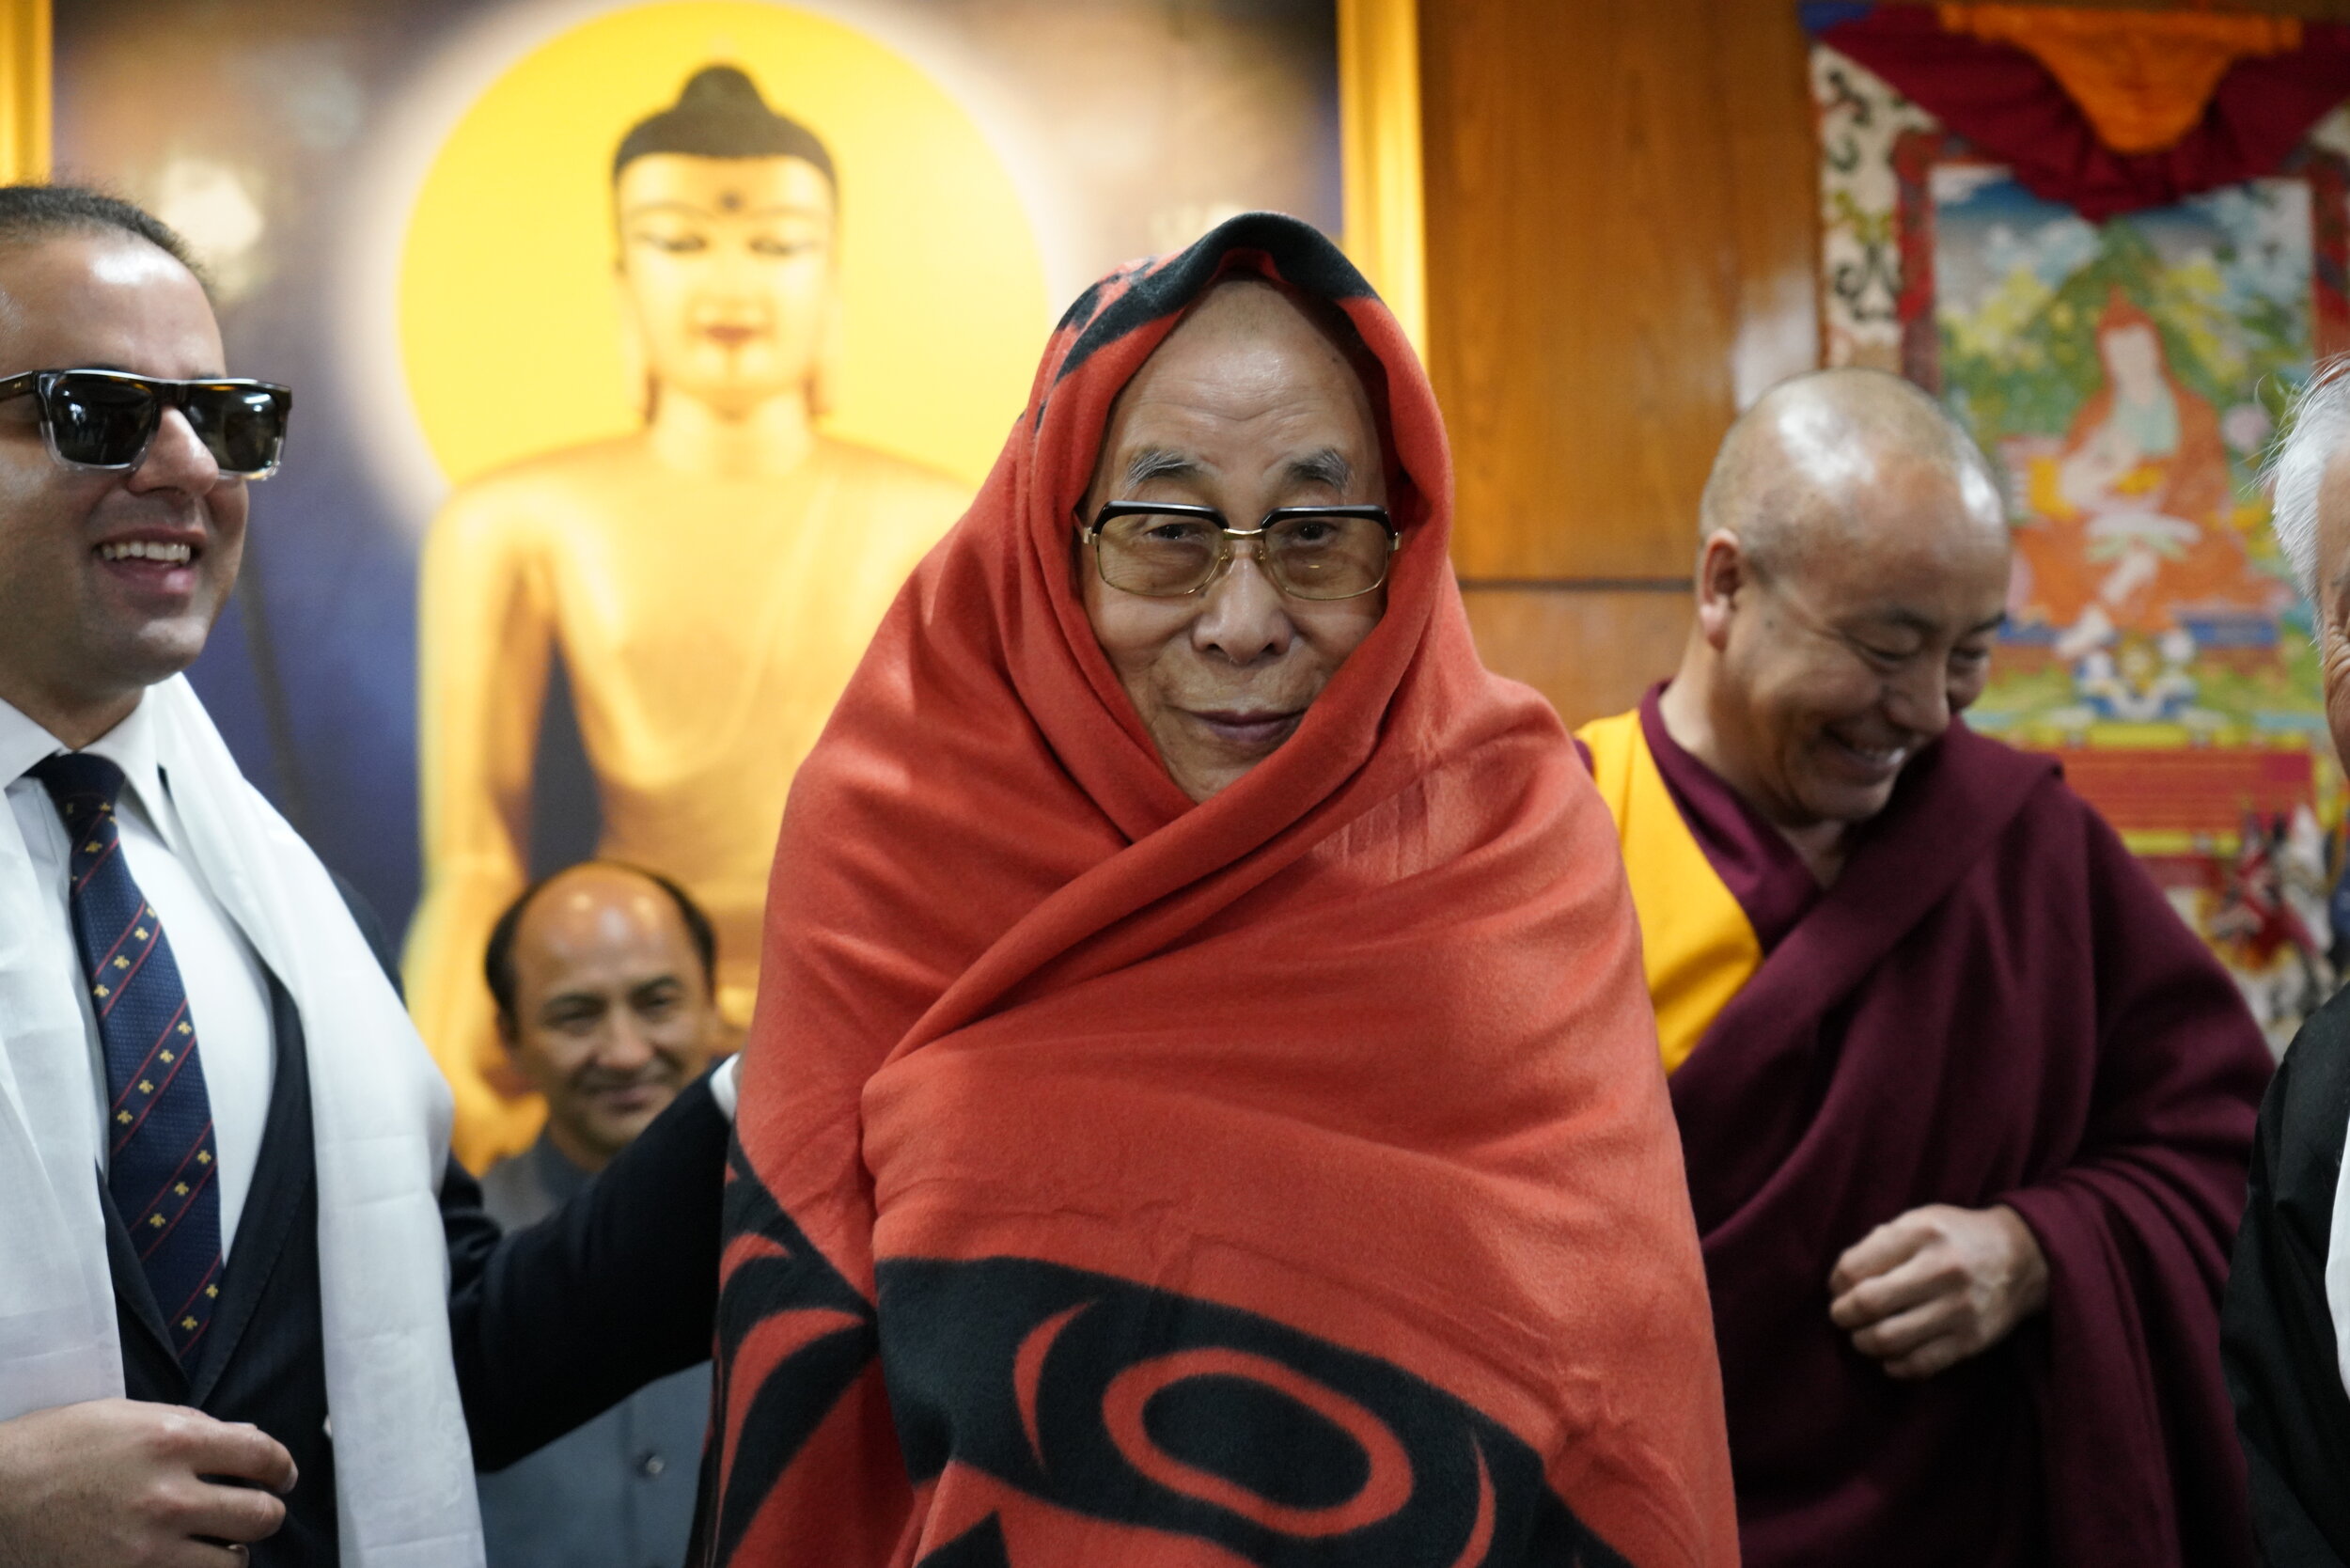  Lt. Governor Habib walks side by side with the Dalai Lama in Dharamsala, India, 2019. 